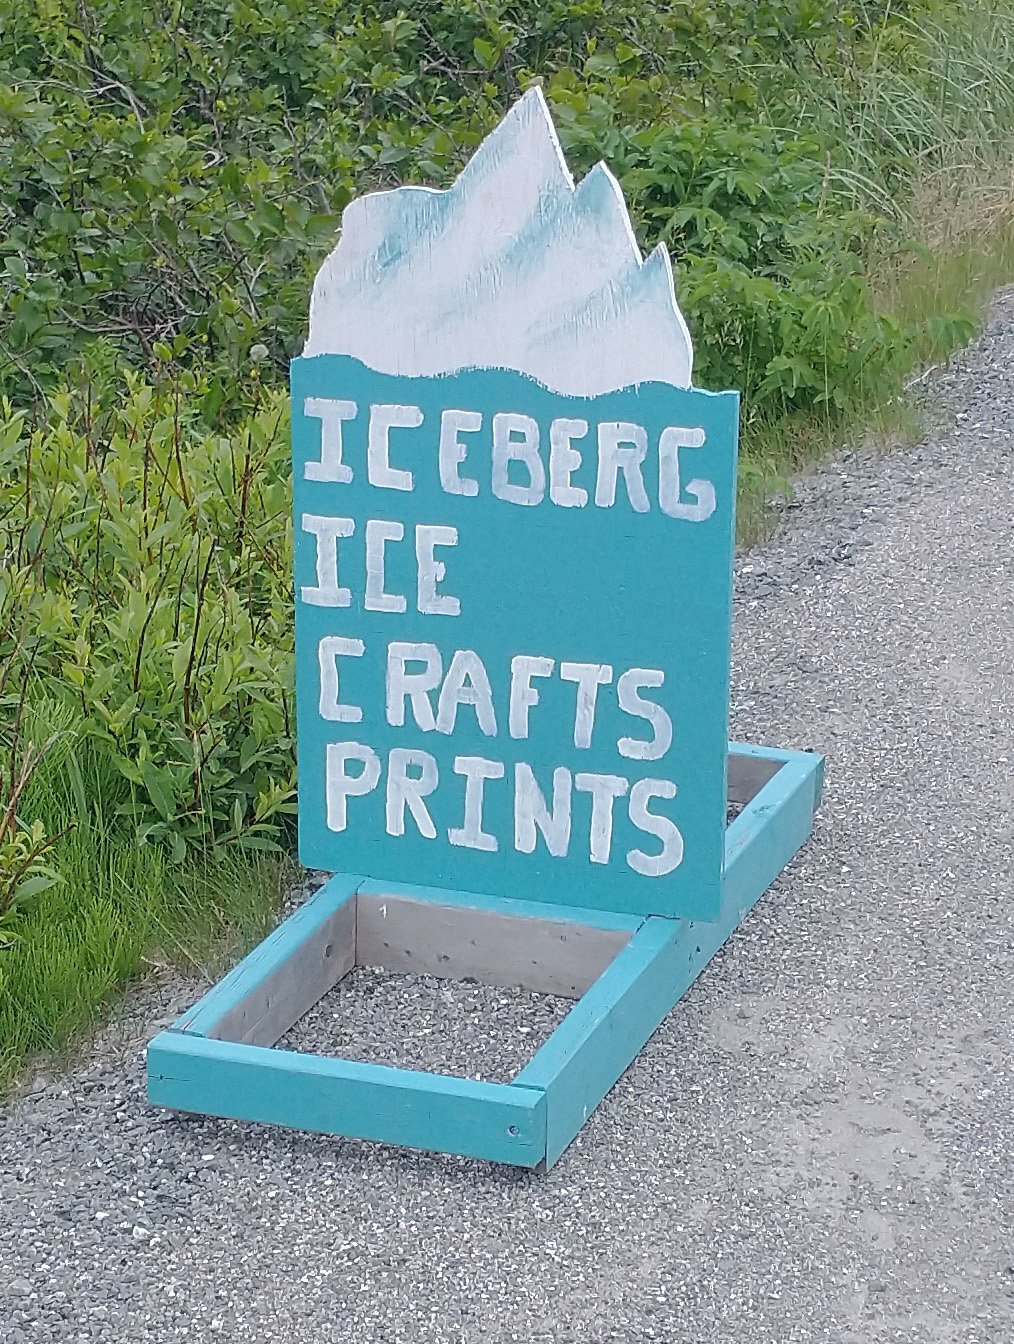 You can also buy "iceberg ice", also known as "ice".